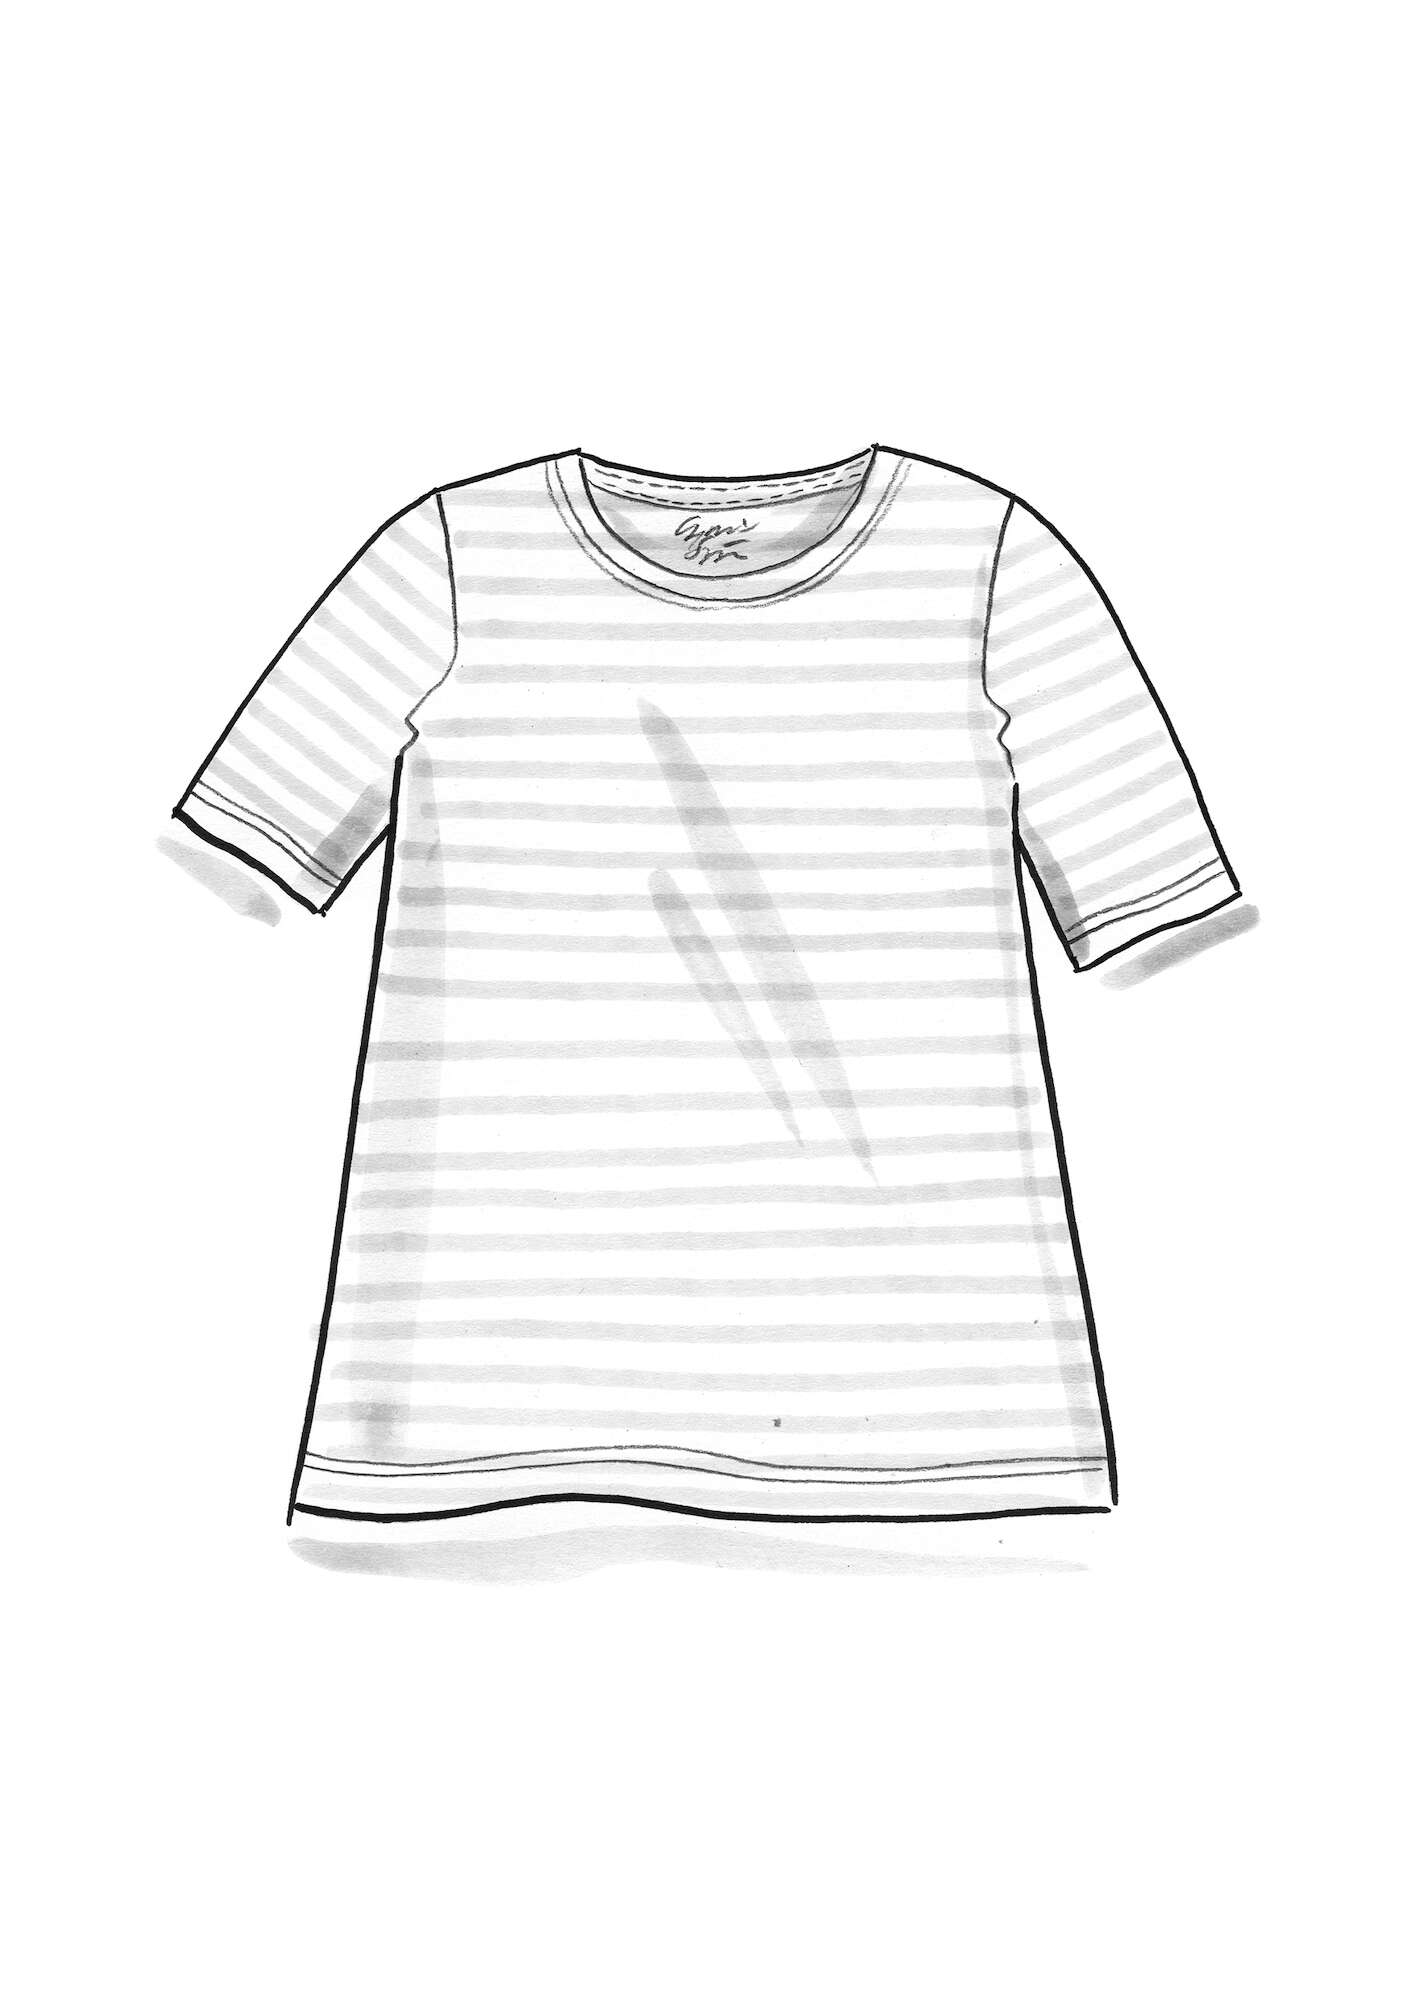 Striped T-shirt in organic cotton meadow brook/unbleached